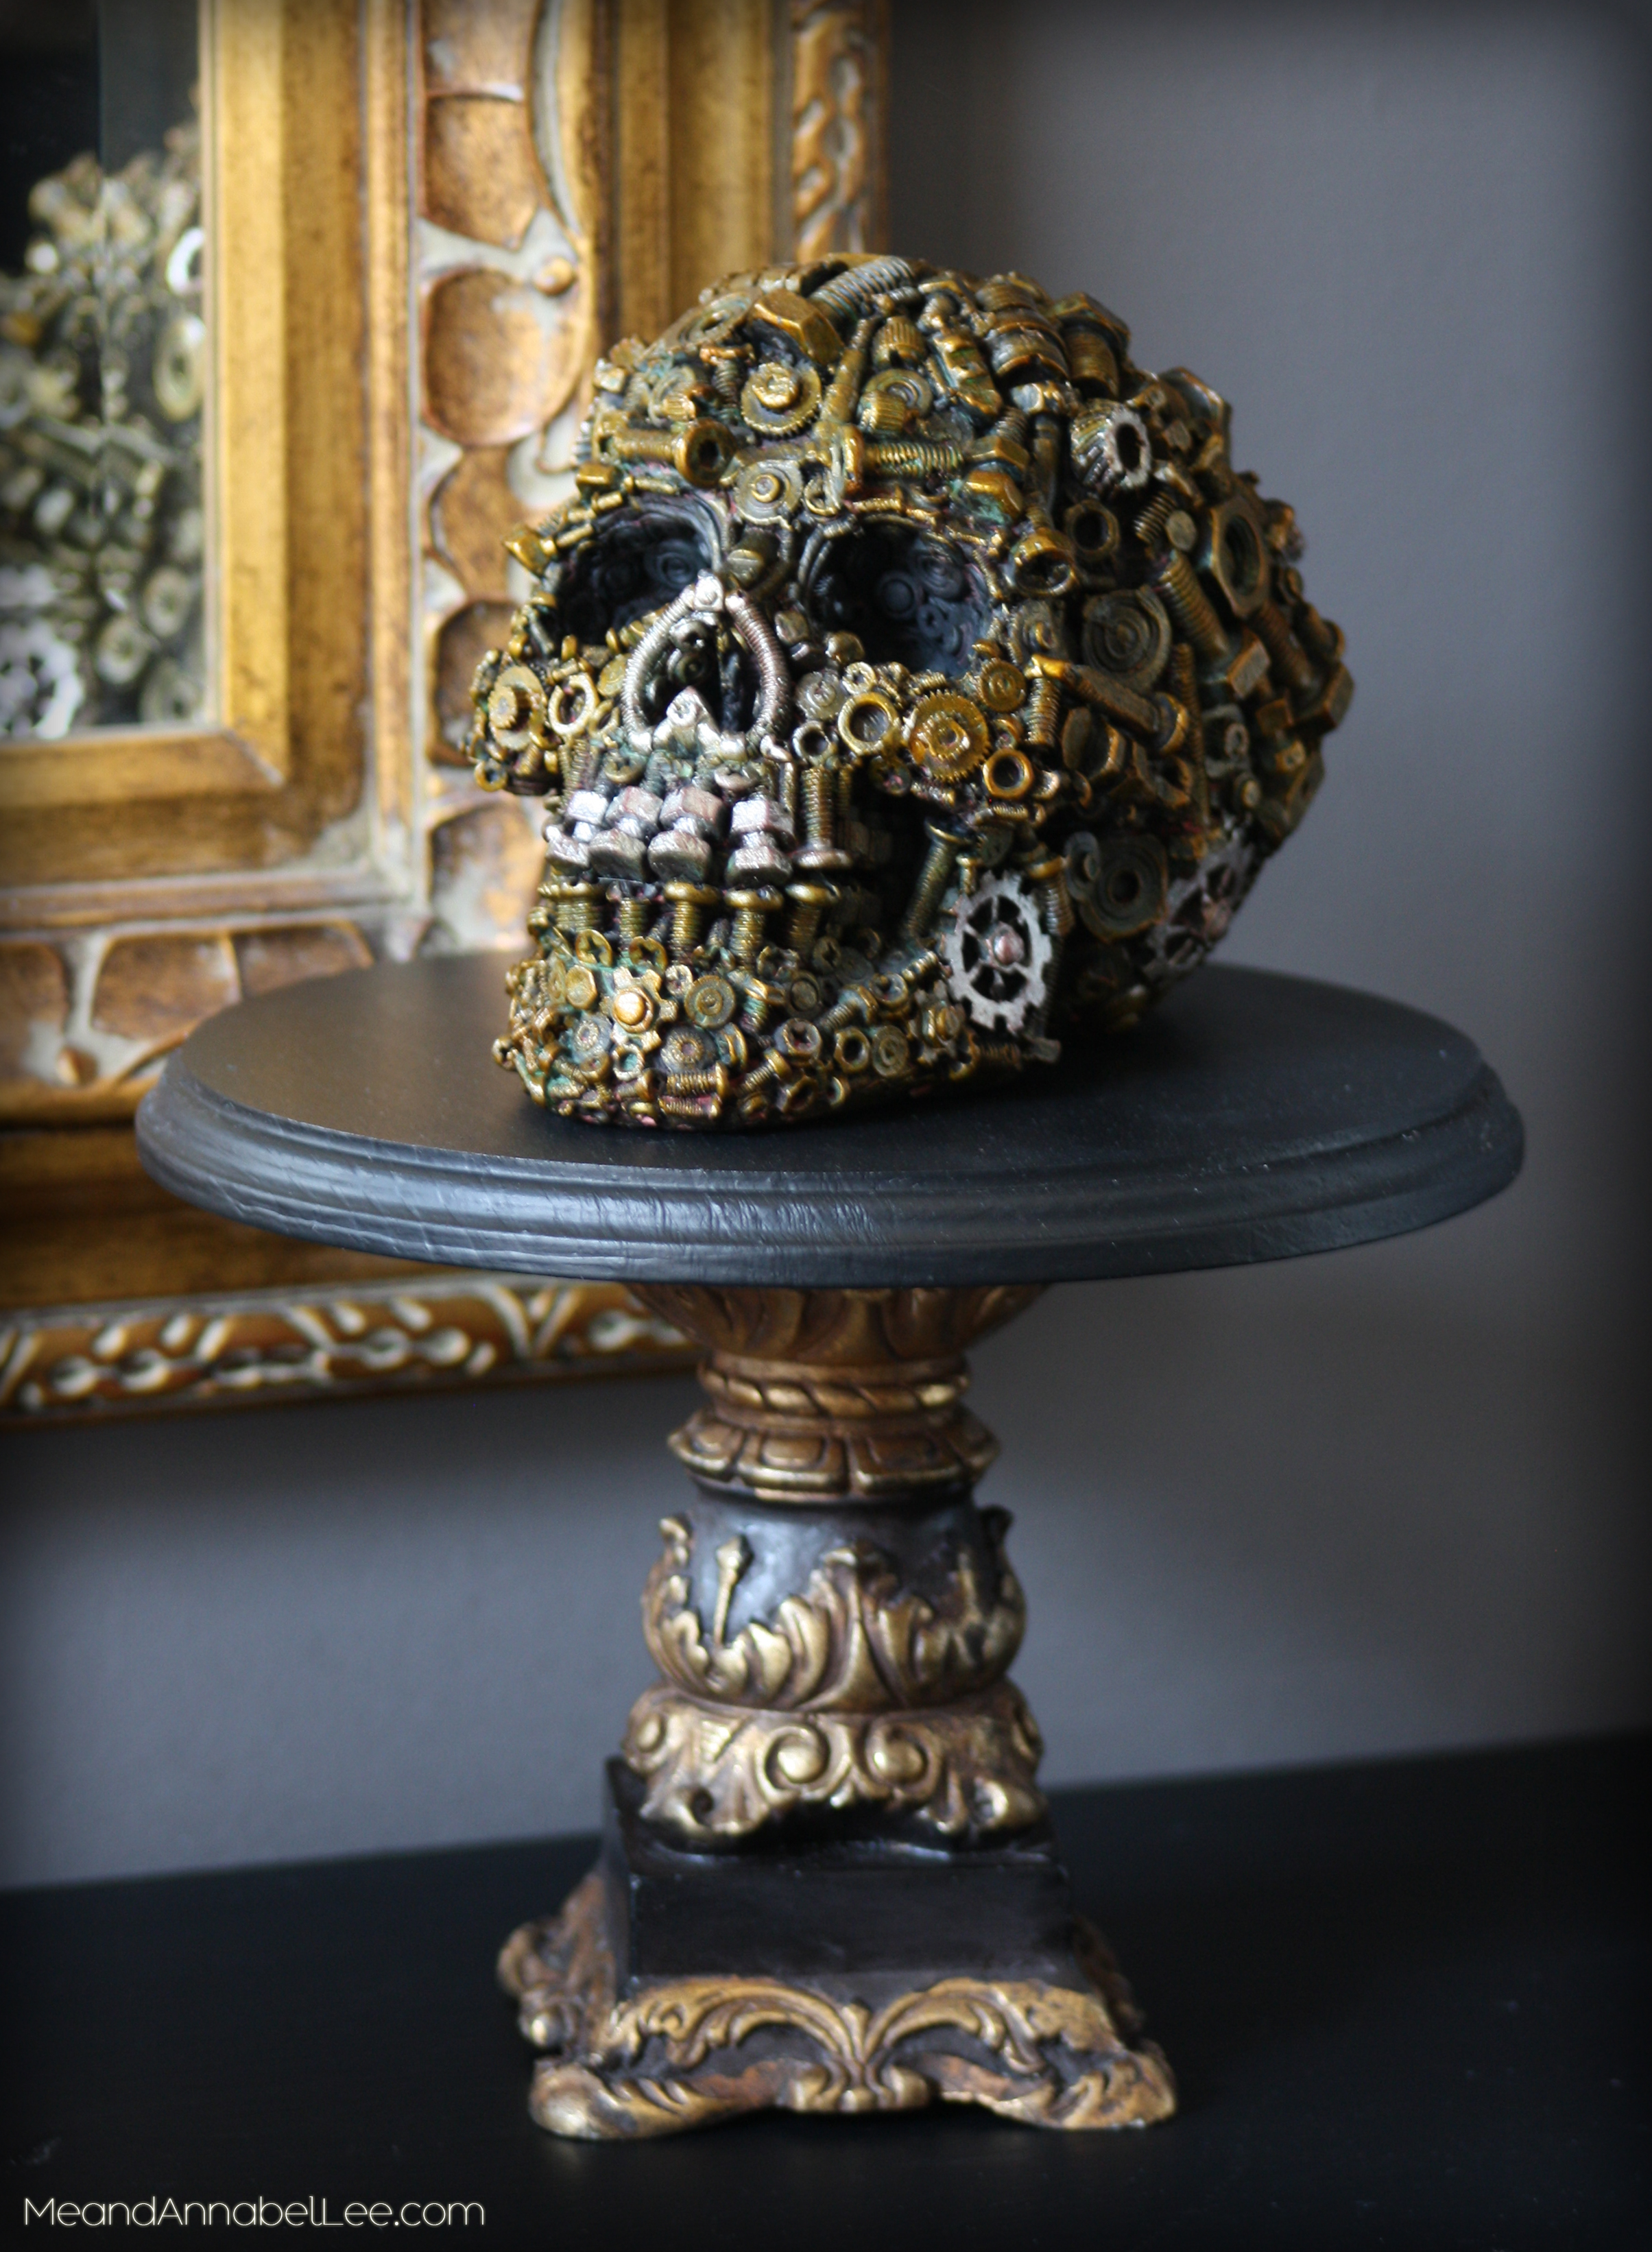 Fit For a King - Black & Gold Gothic Cake Stand - Trash to Treasure Style! Dark Style - Skull Decor - www.meandannabellee.com